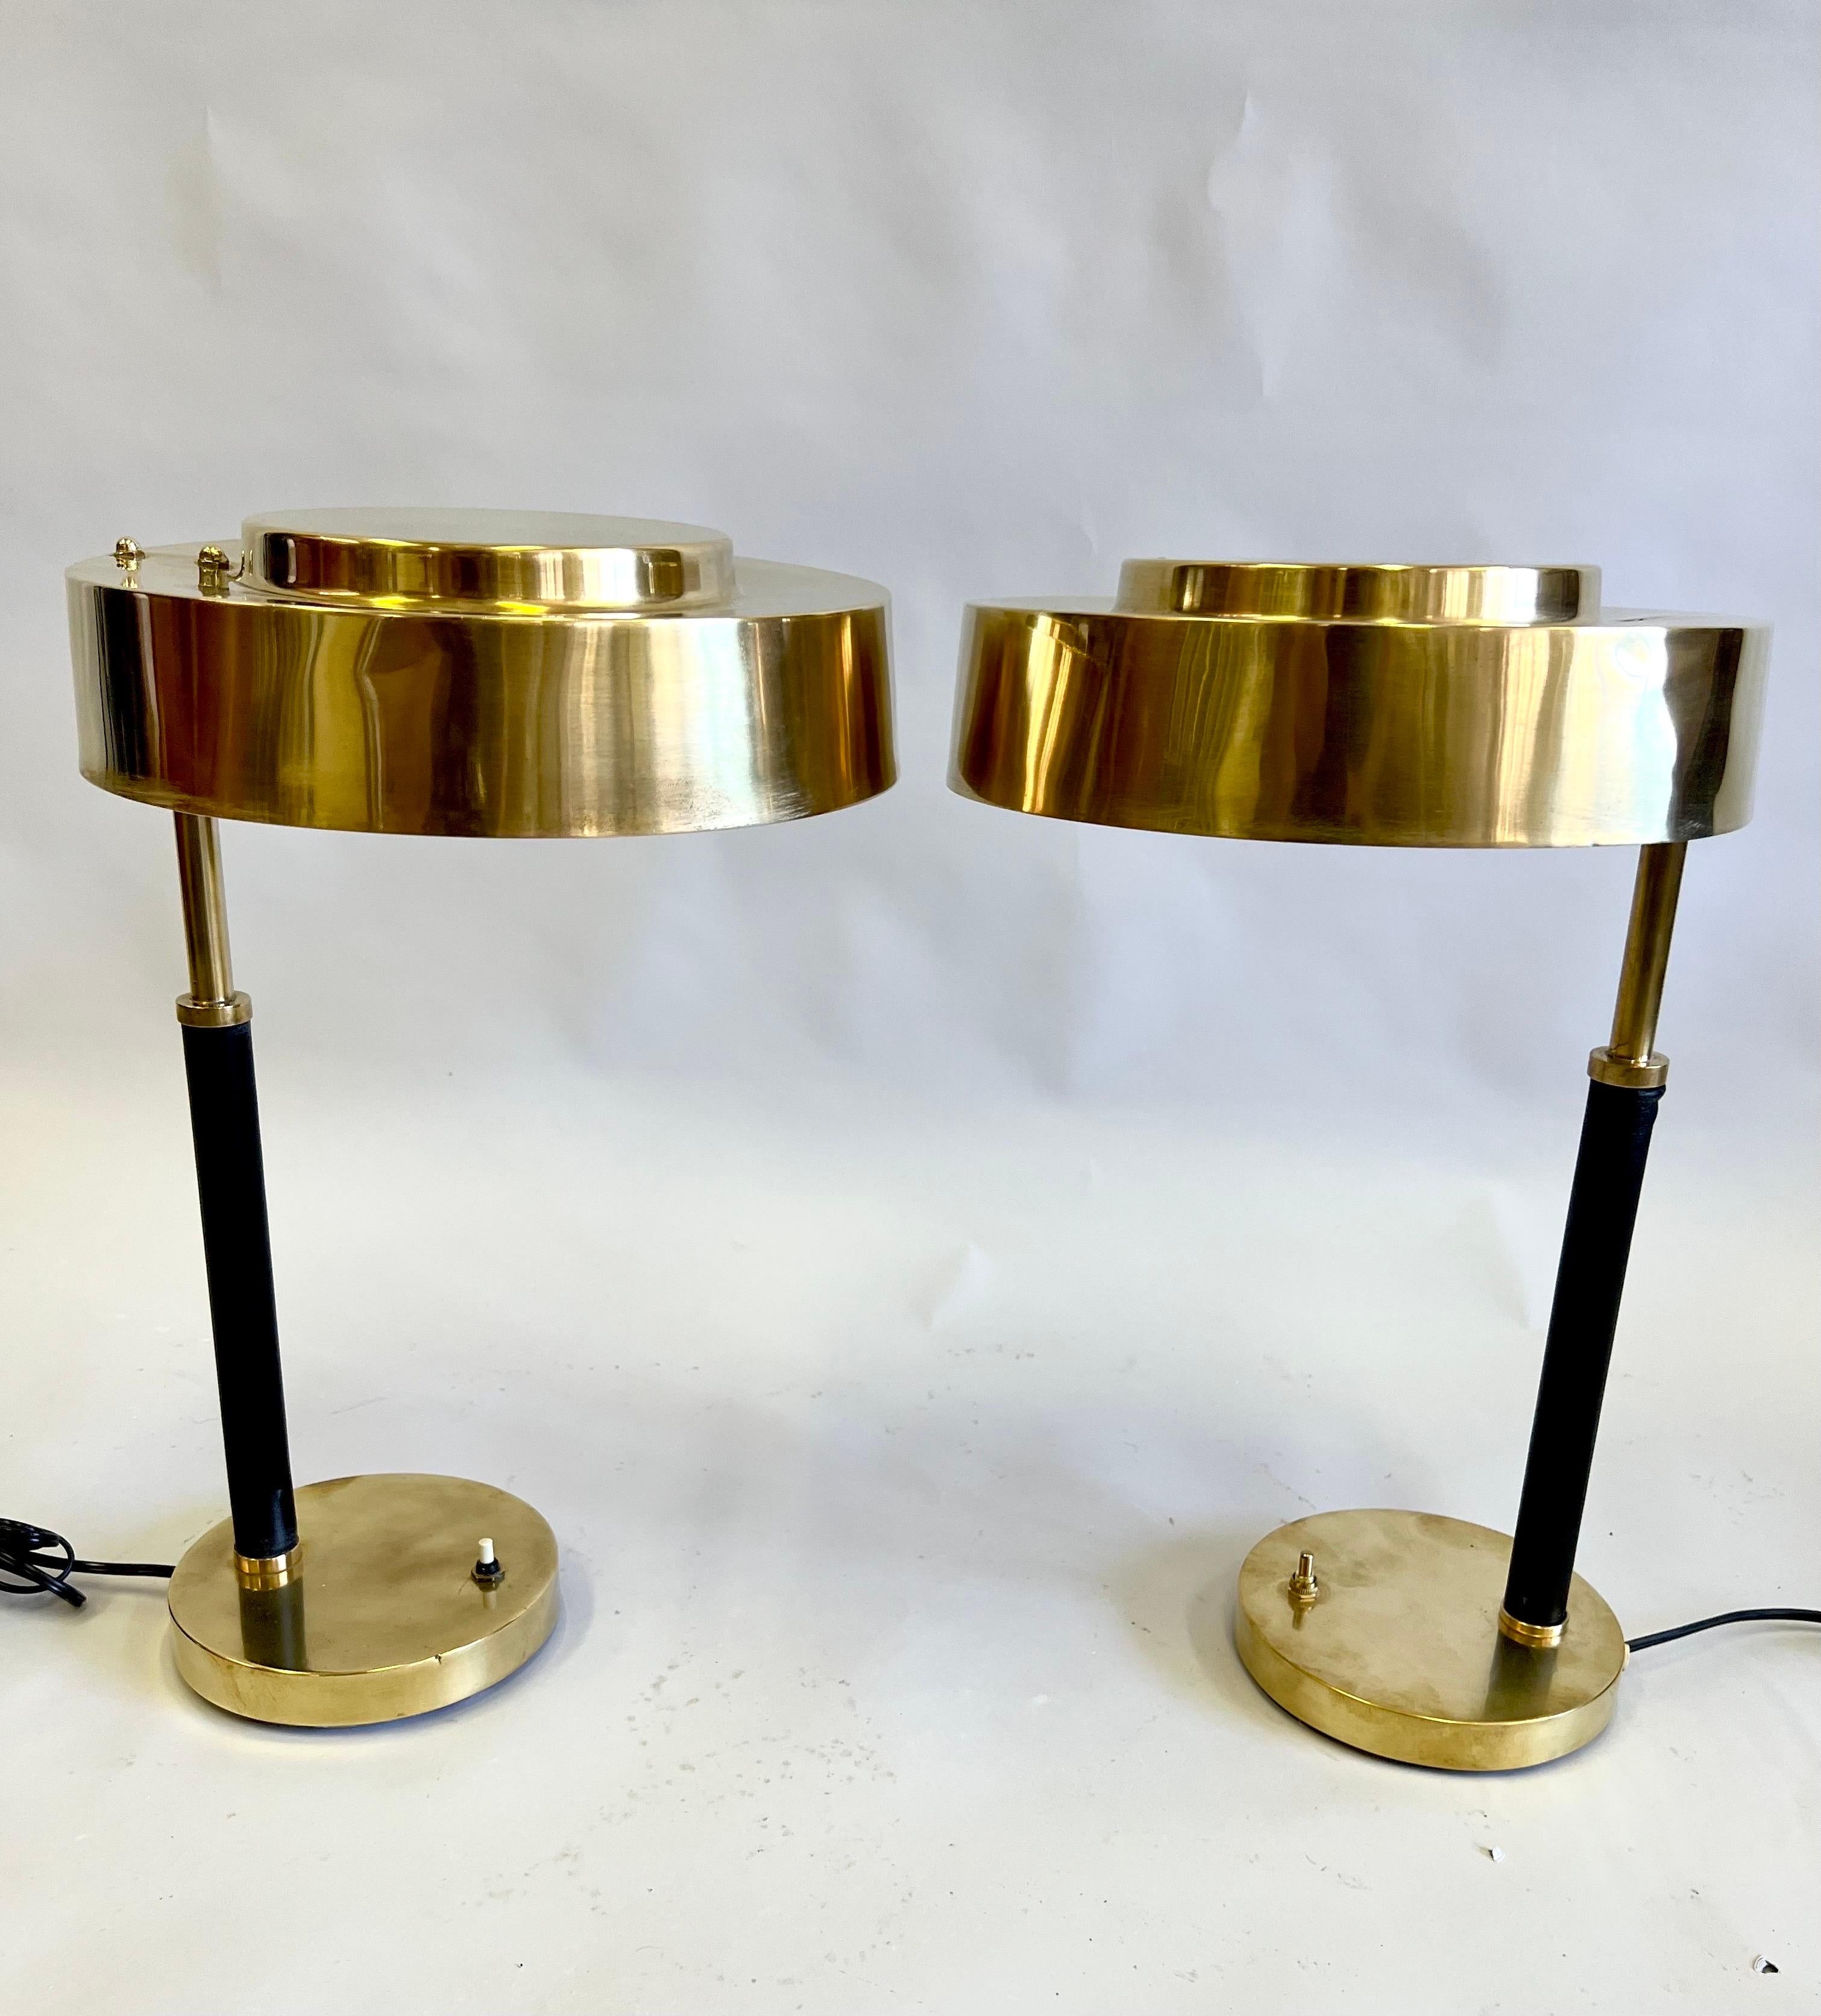 Pair French Midcentury Art Deco Brass & Leather Desk/ Table Lamps, Jacques Adnet In Good Condition For Sale In New York, NY